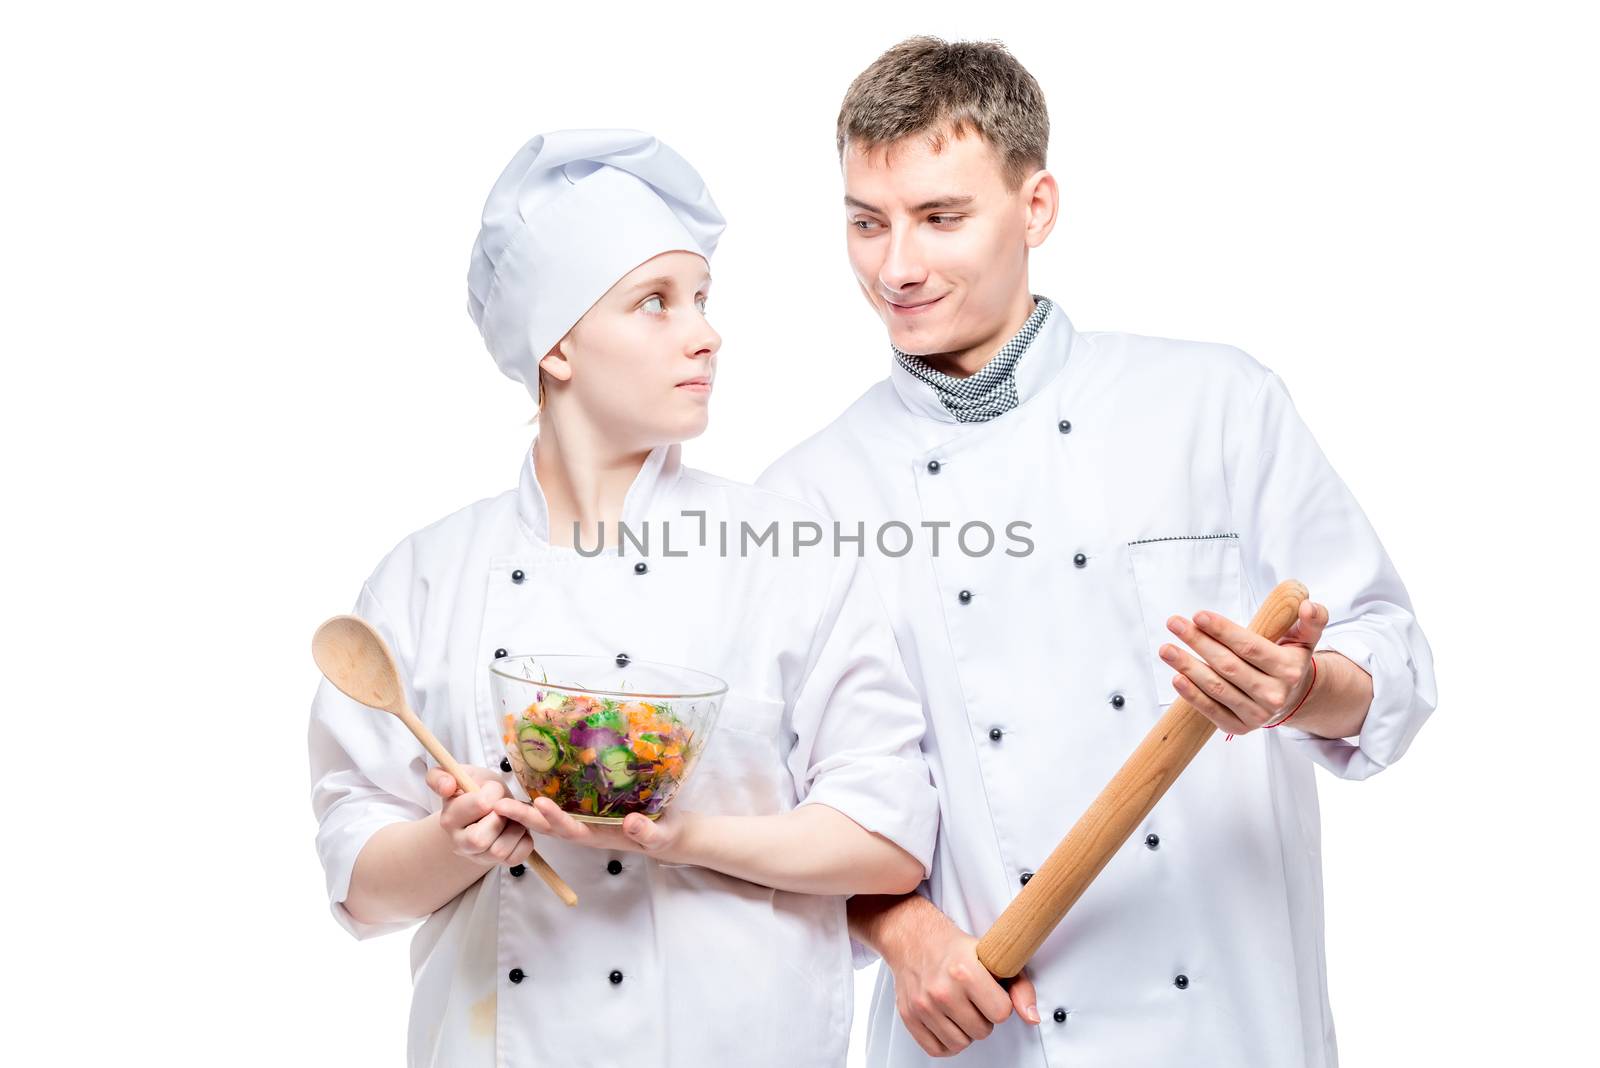 portrait of young professional chefs with a dish on a white back by kosmsos111